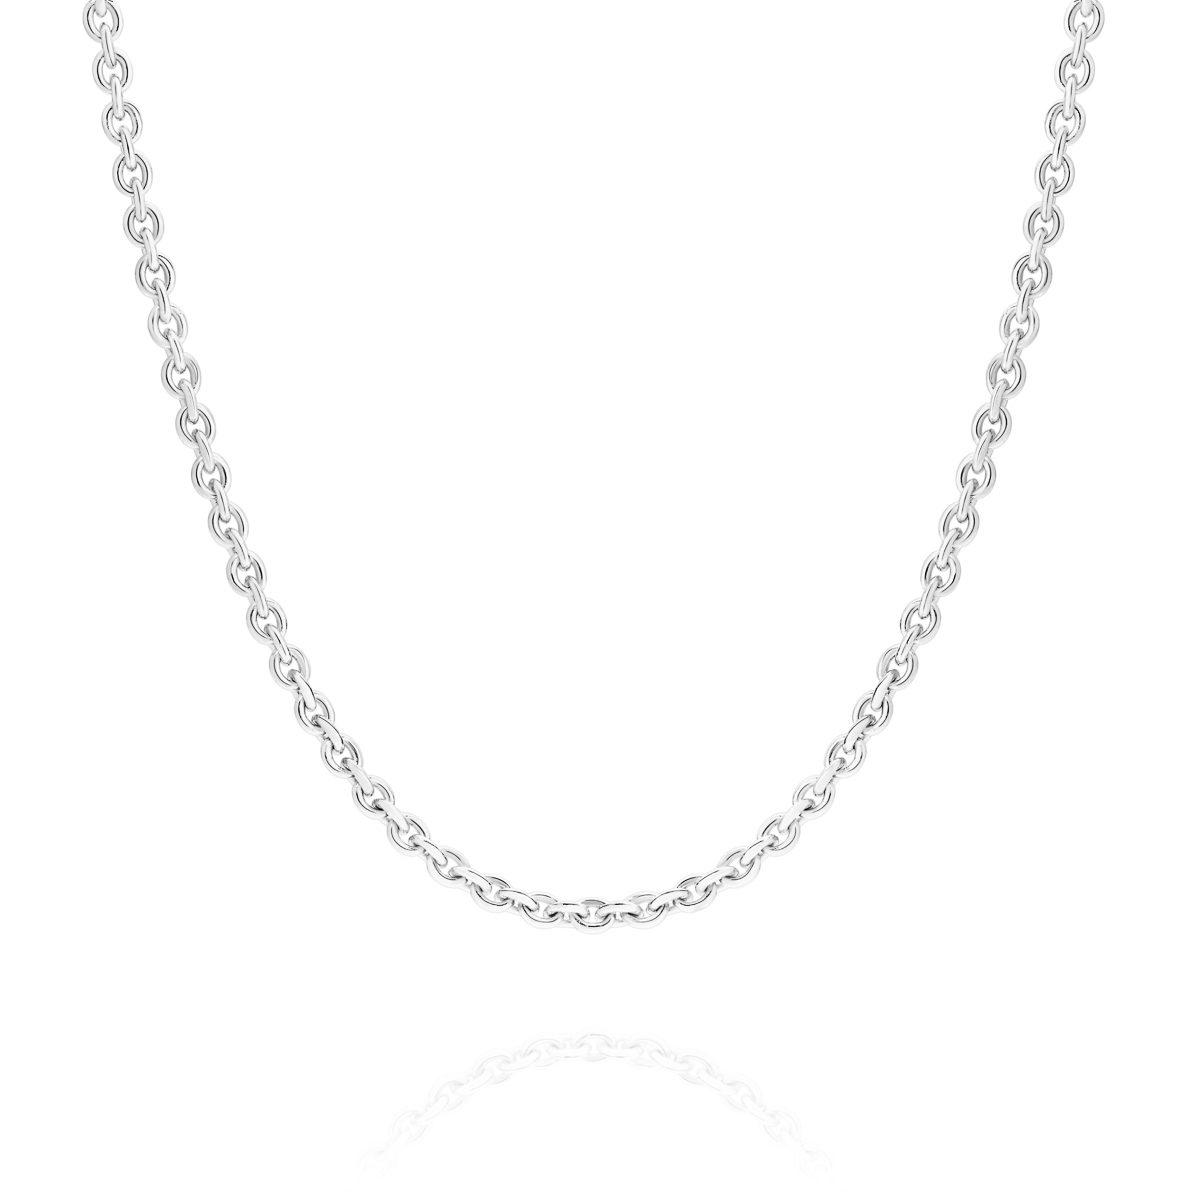 18K White Gold Oval Link Polished Finish Chain